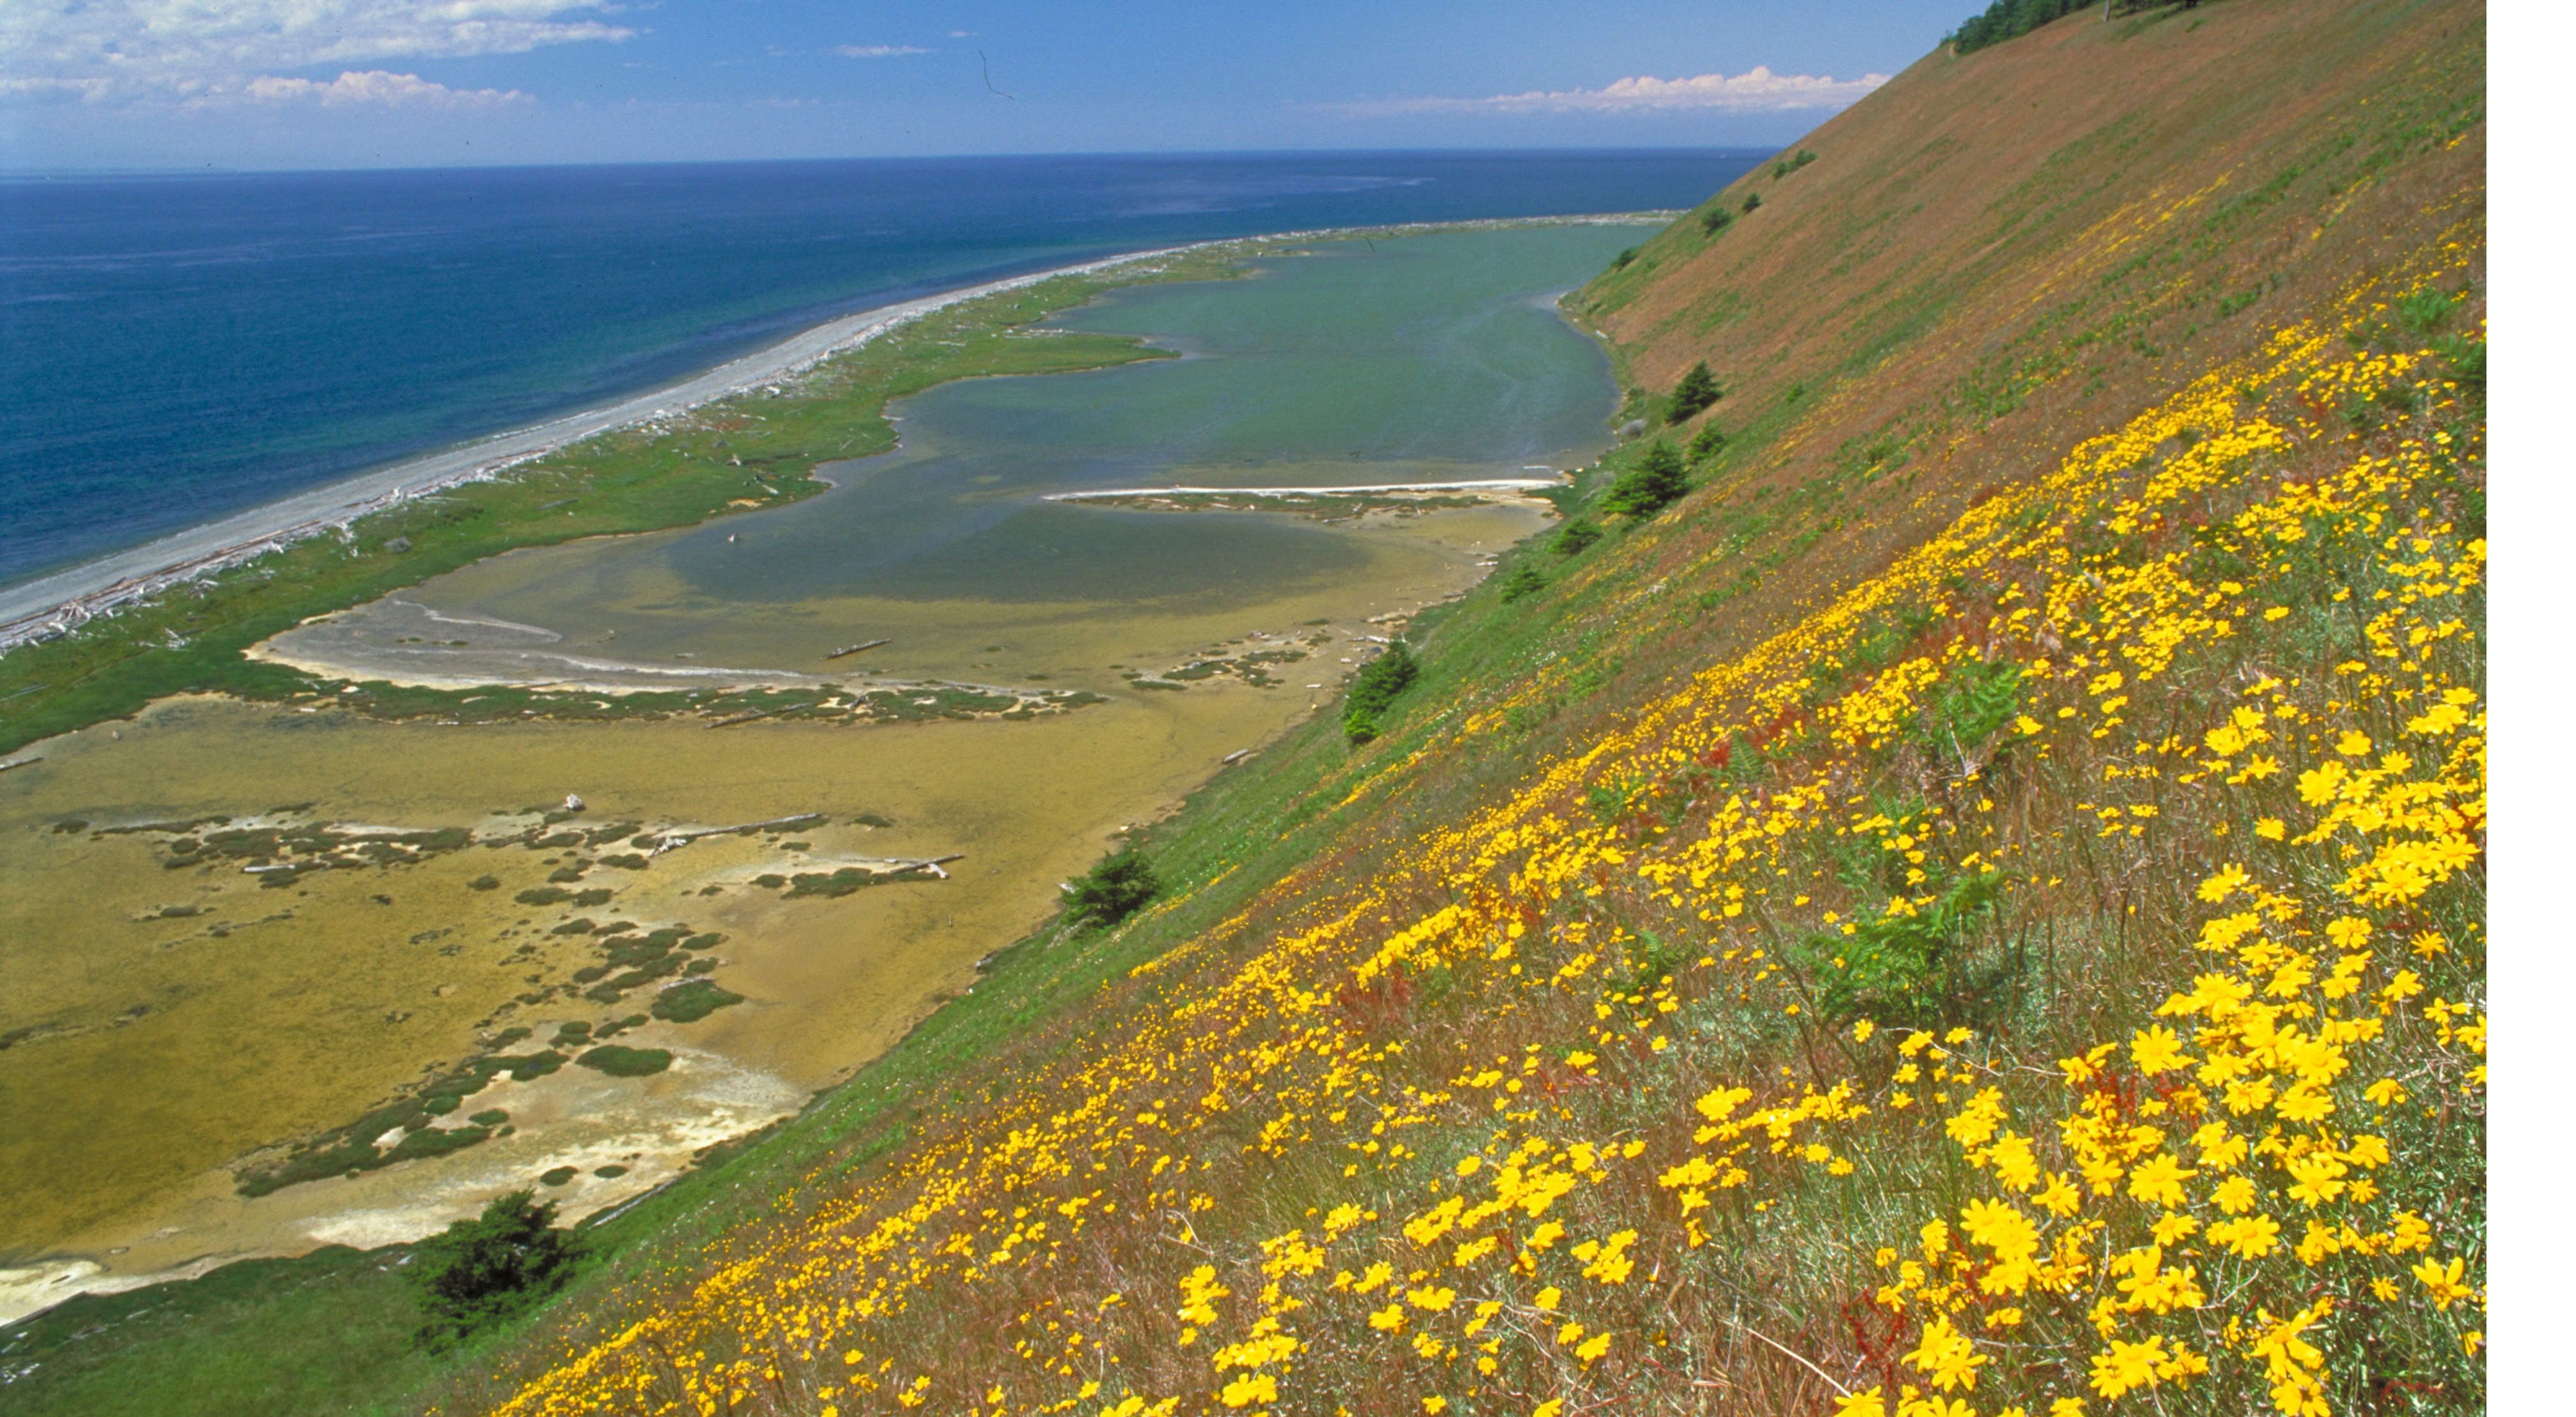 Perego's Lagoon viewed from bluff at Ebey's Landing. Yellow flower is Oregon sunshine.